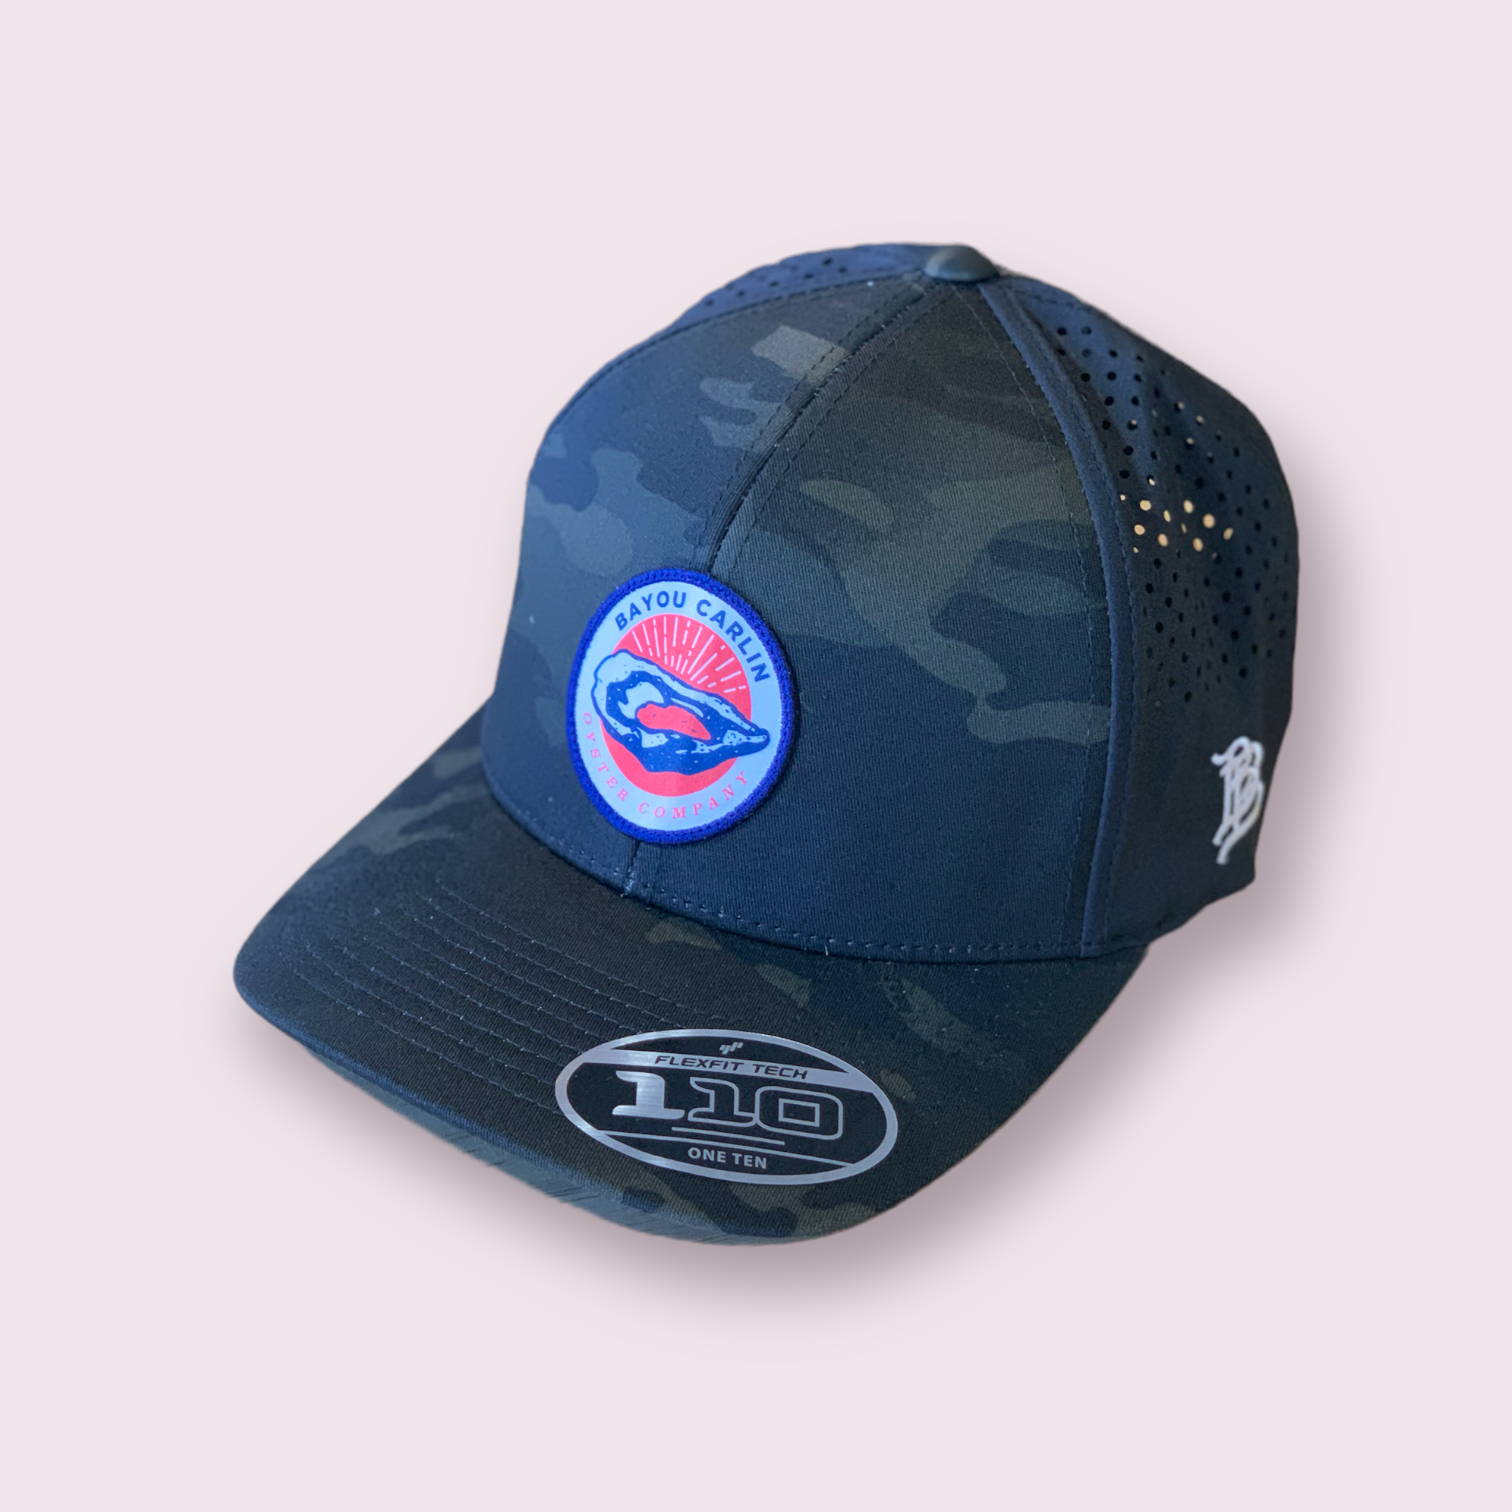 Performance Patch Sublimated - Black Carlin MultiCa – Oyster Hat - Curved Bayou Logo Trucker